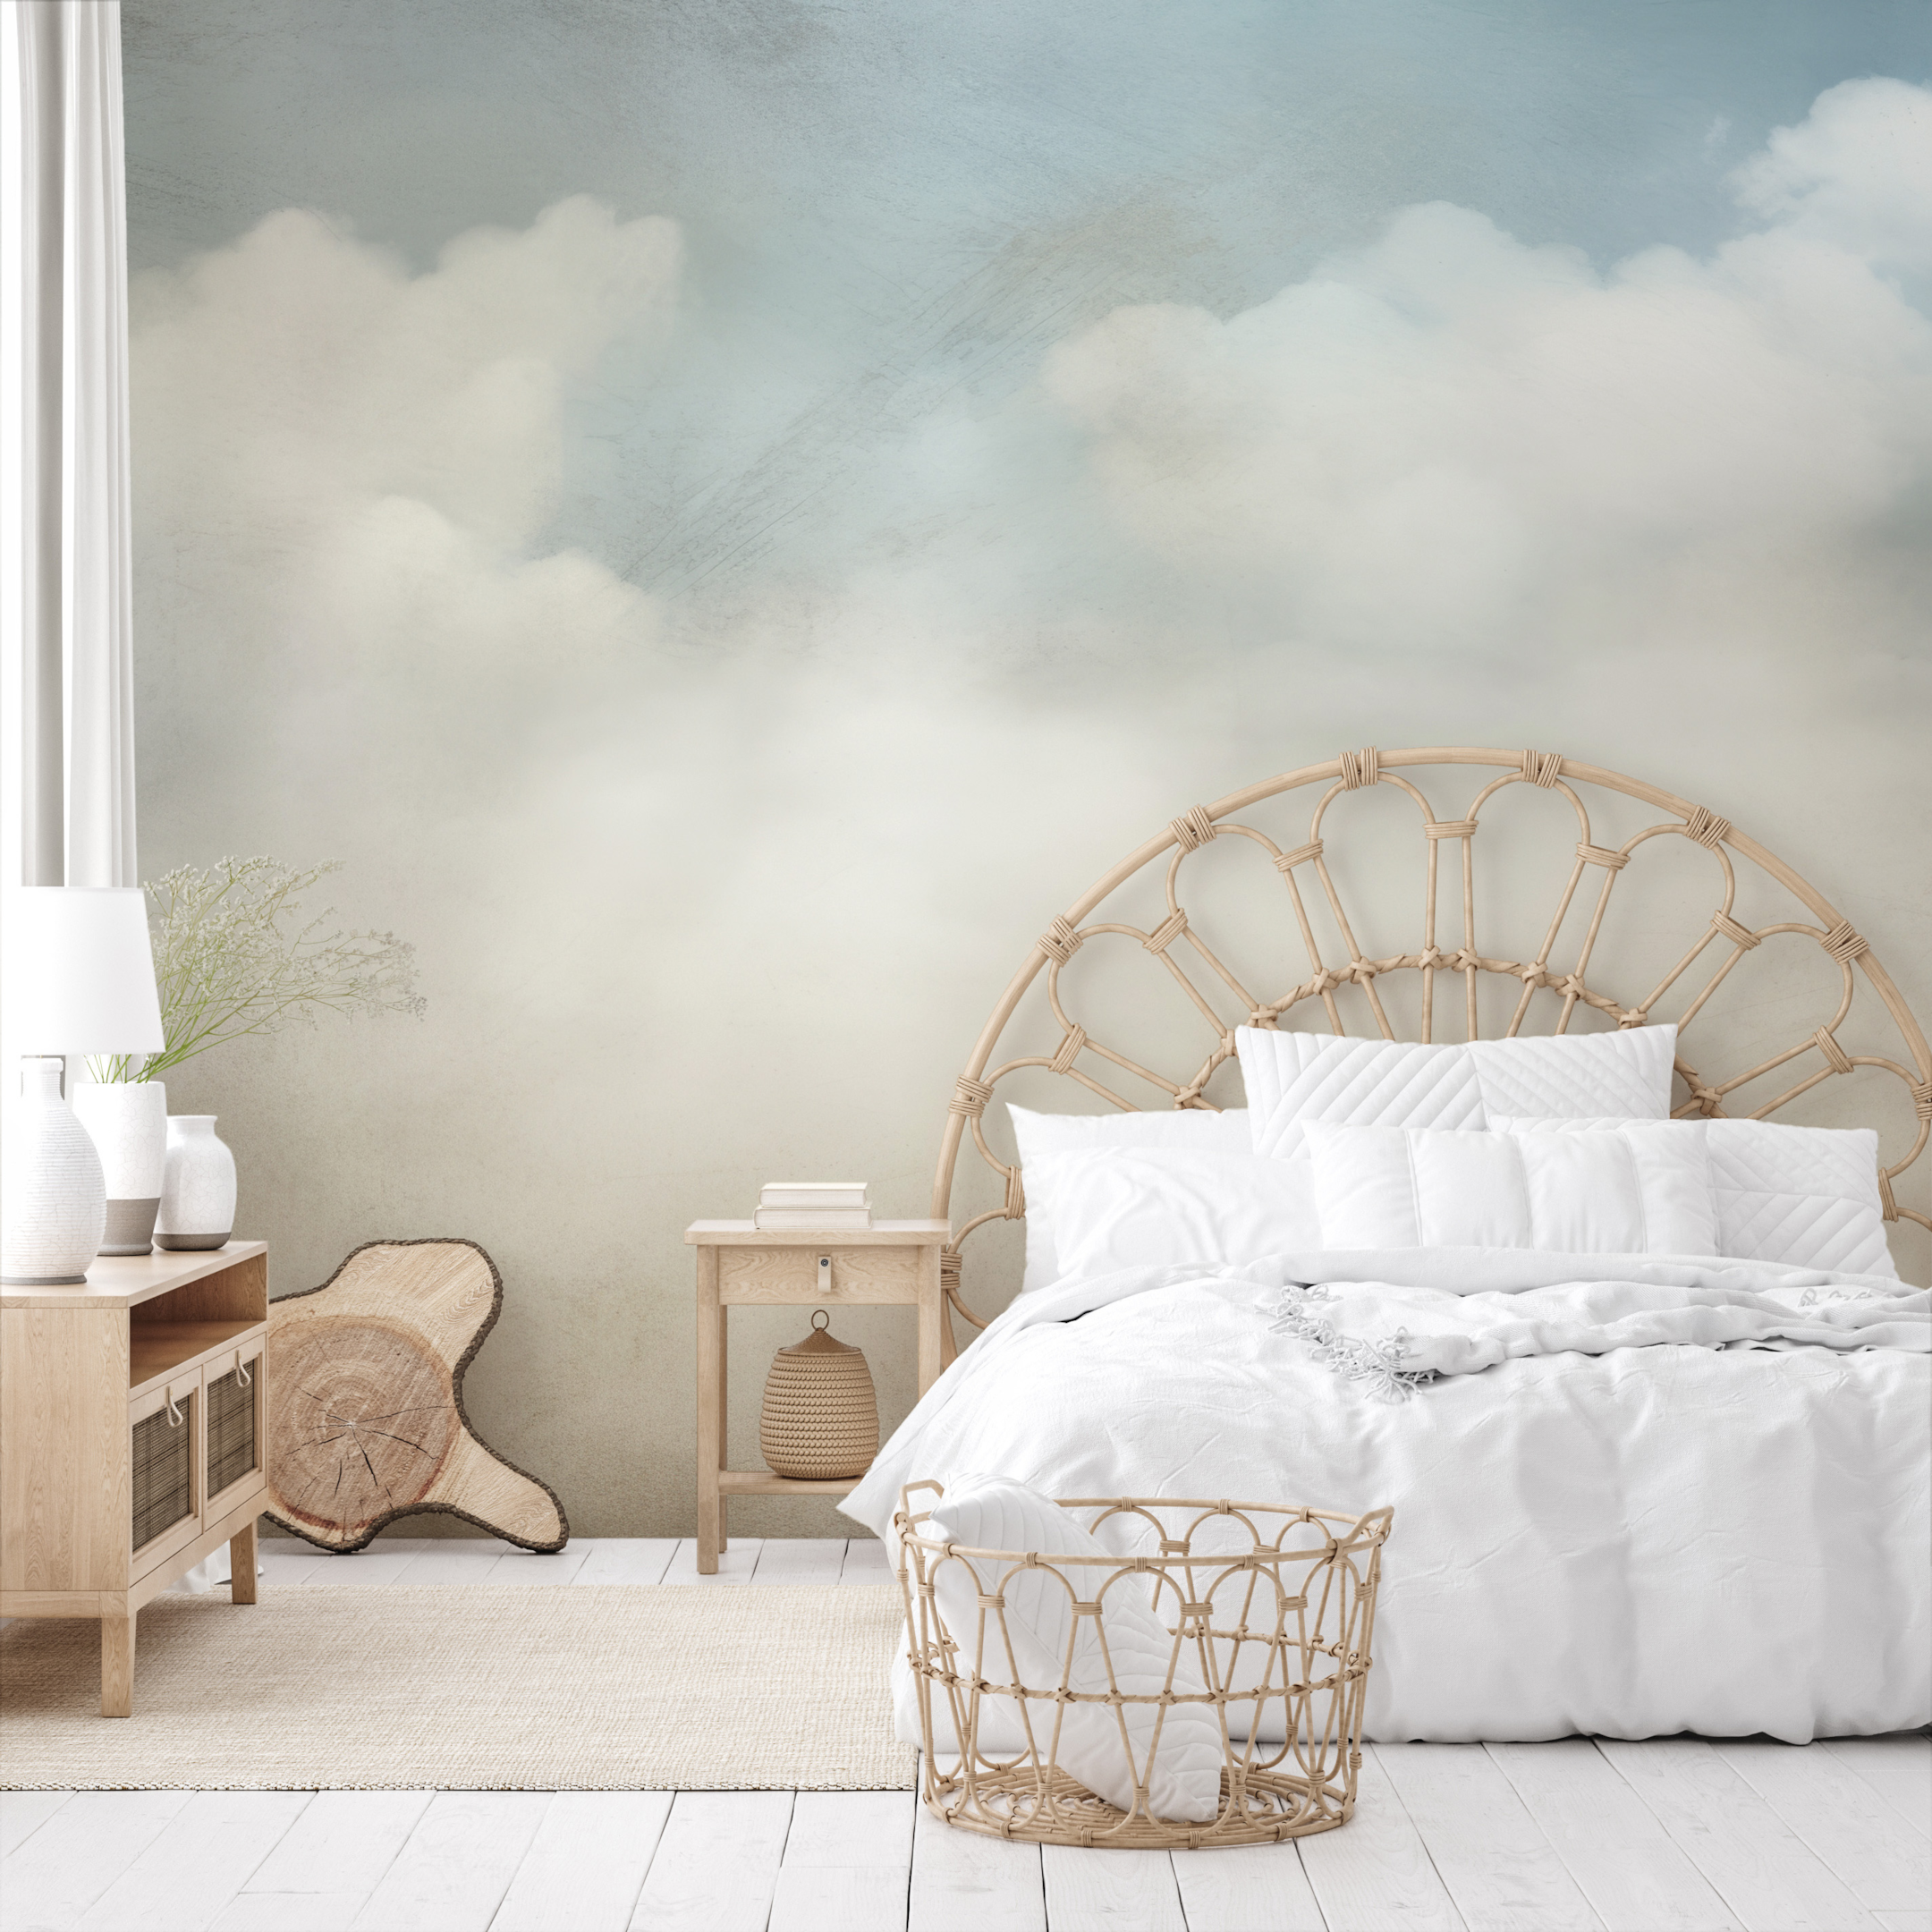 One of our photo wallpapers from the "Concrete&Clouds" collection placed on the wall in the bedroom